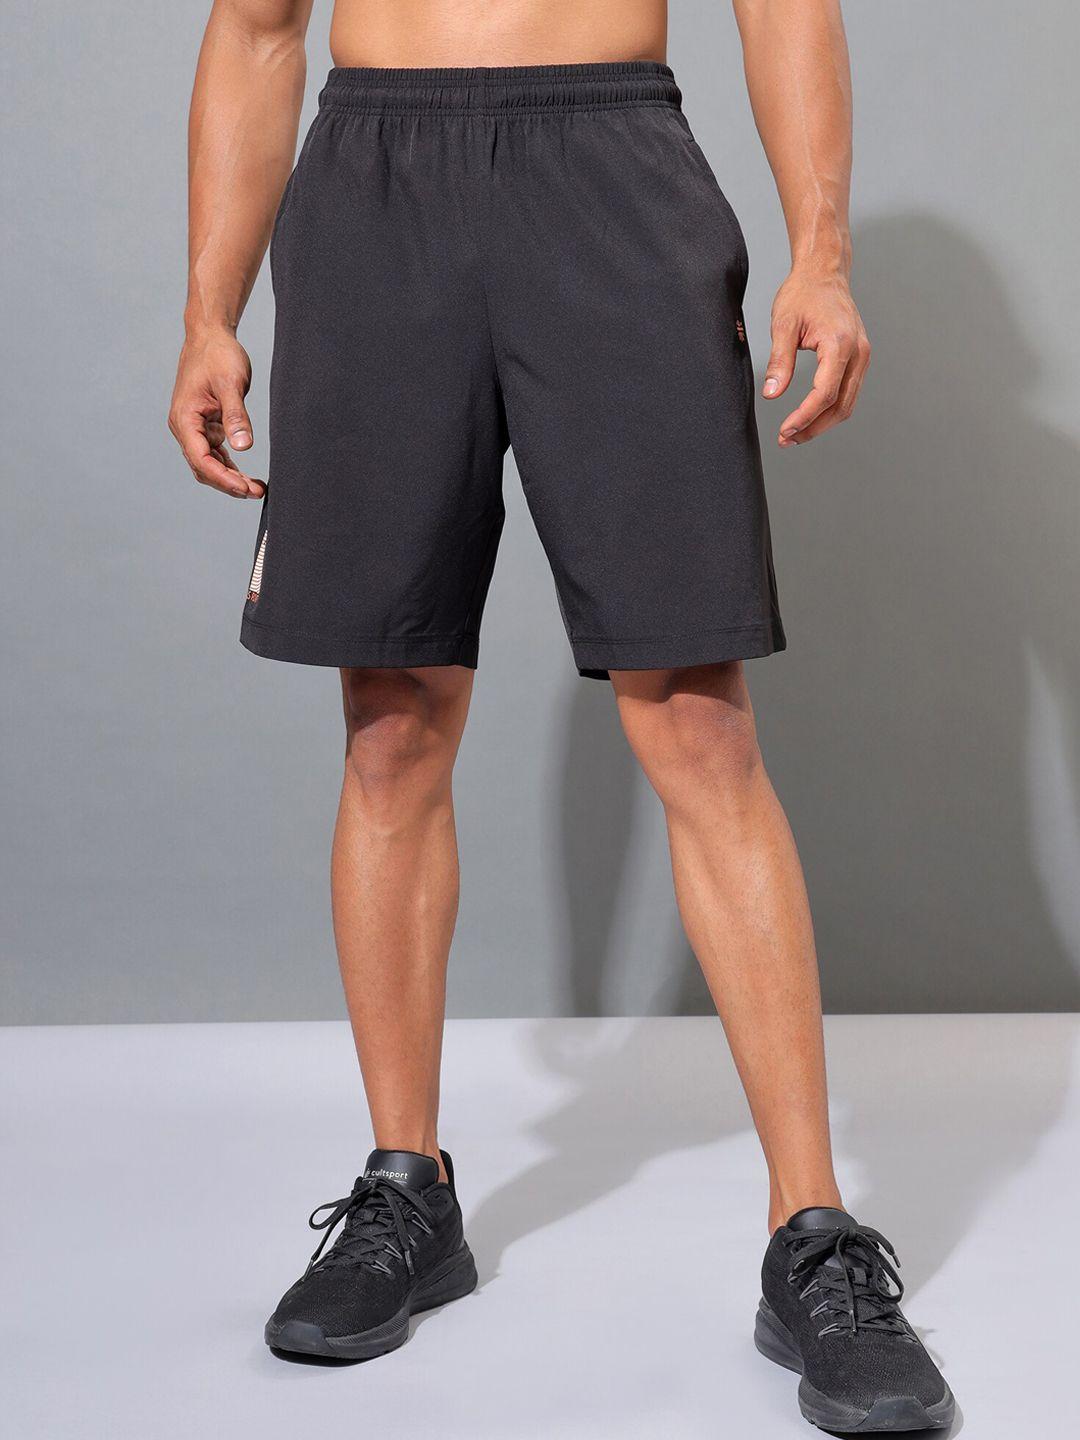 cultsportone men black solid training or gym active sports shorts